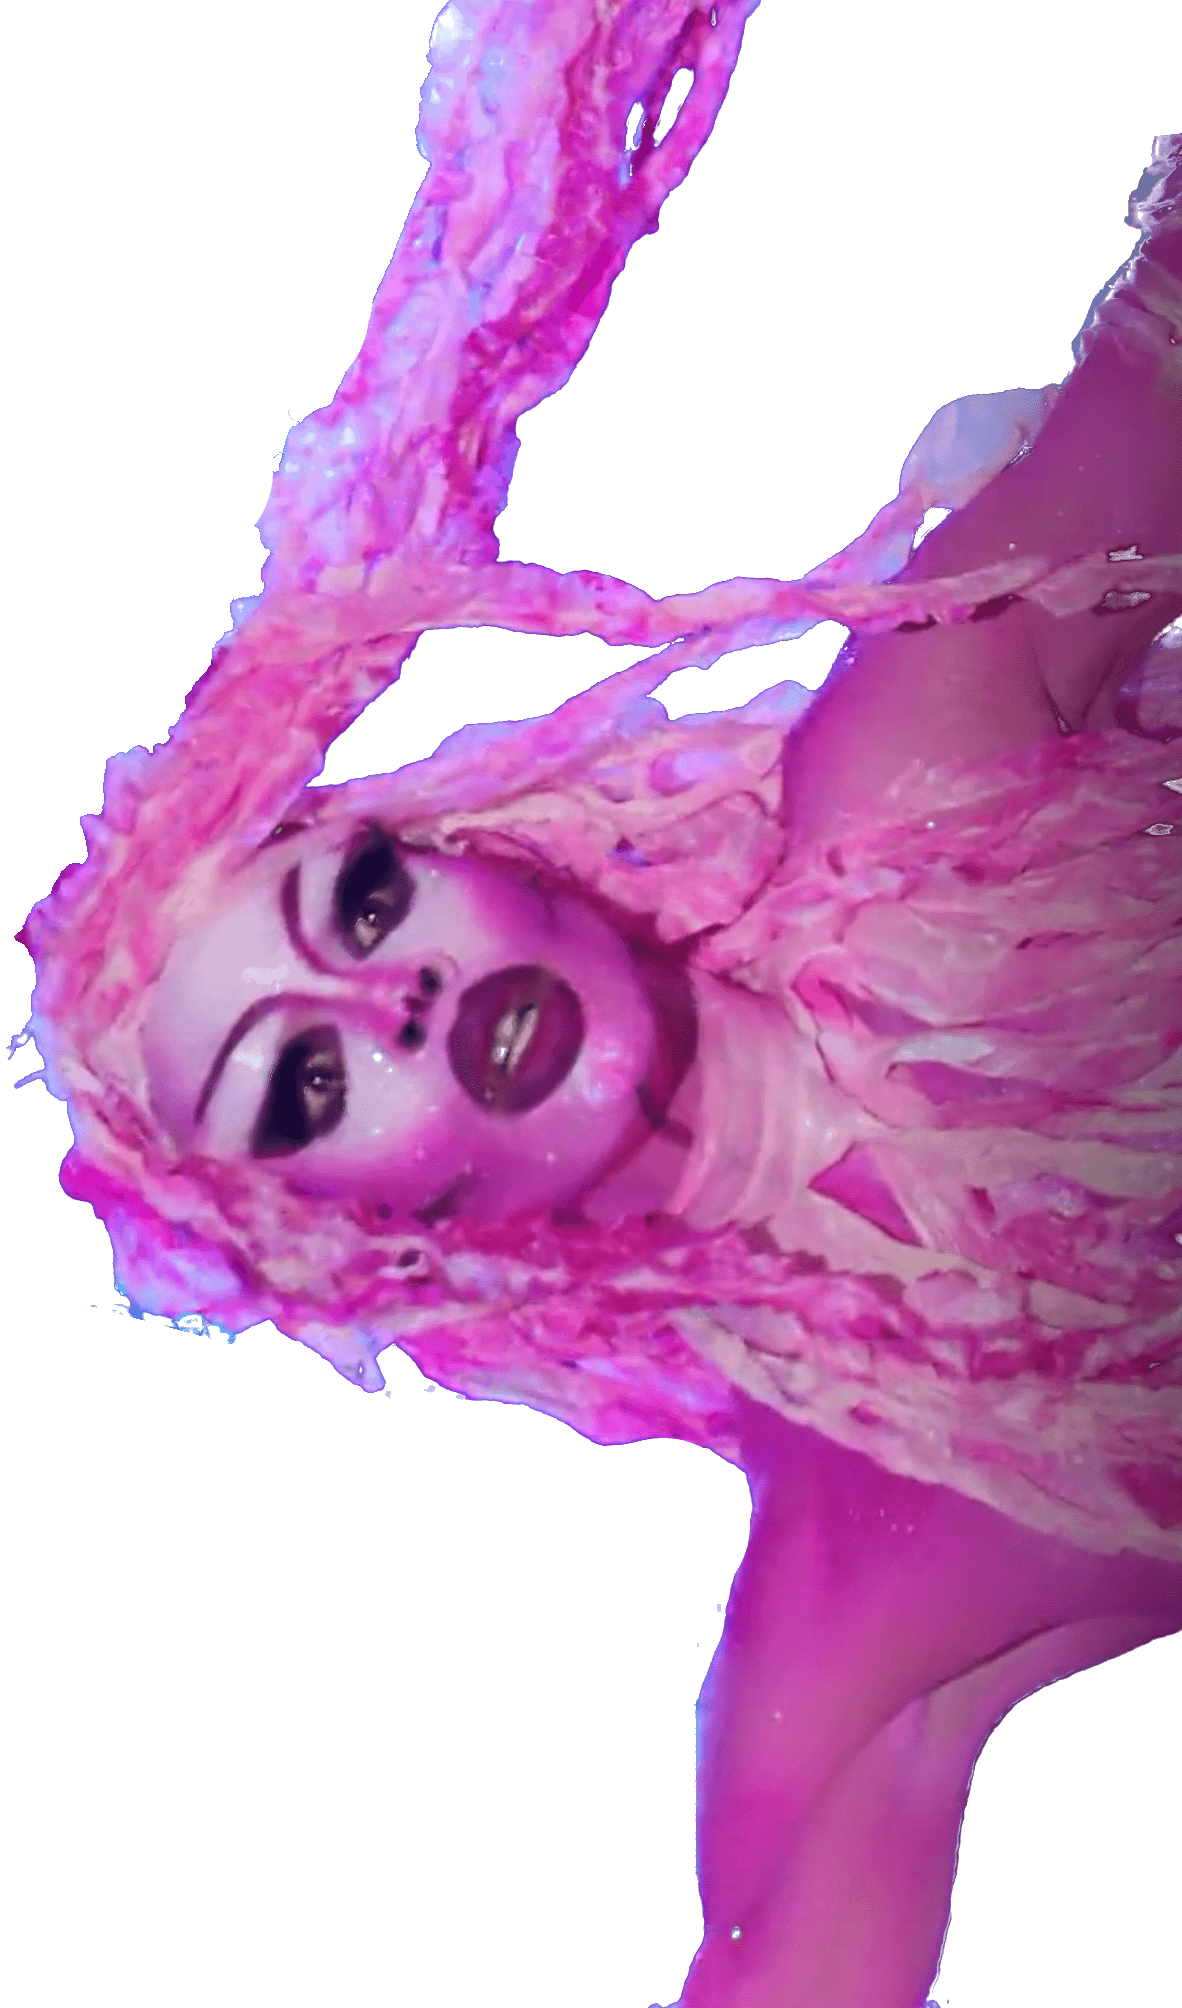 Yvie Oddly in her jellyfish outfit without her head on so you can see her makeup.